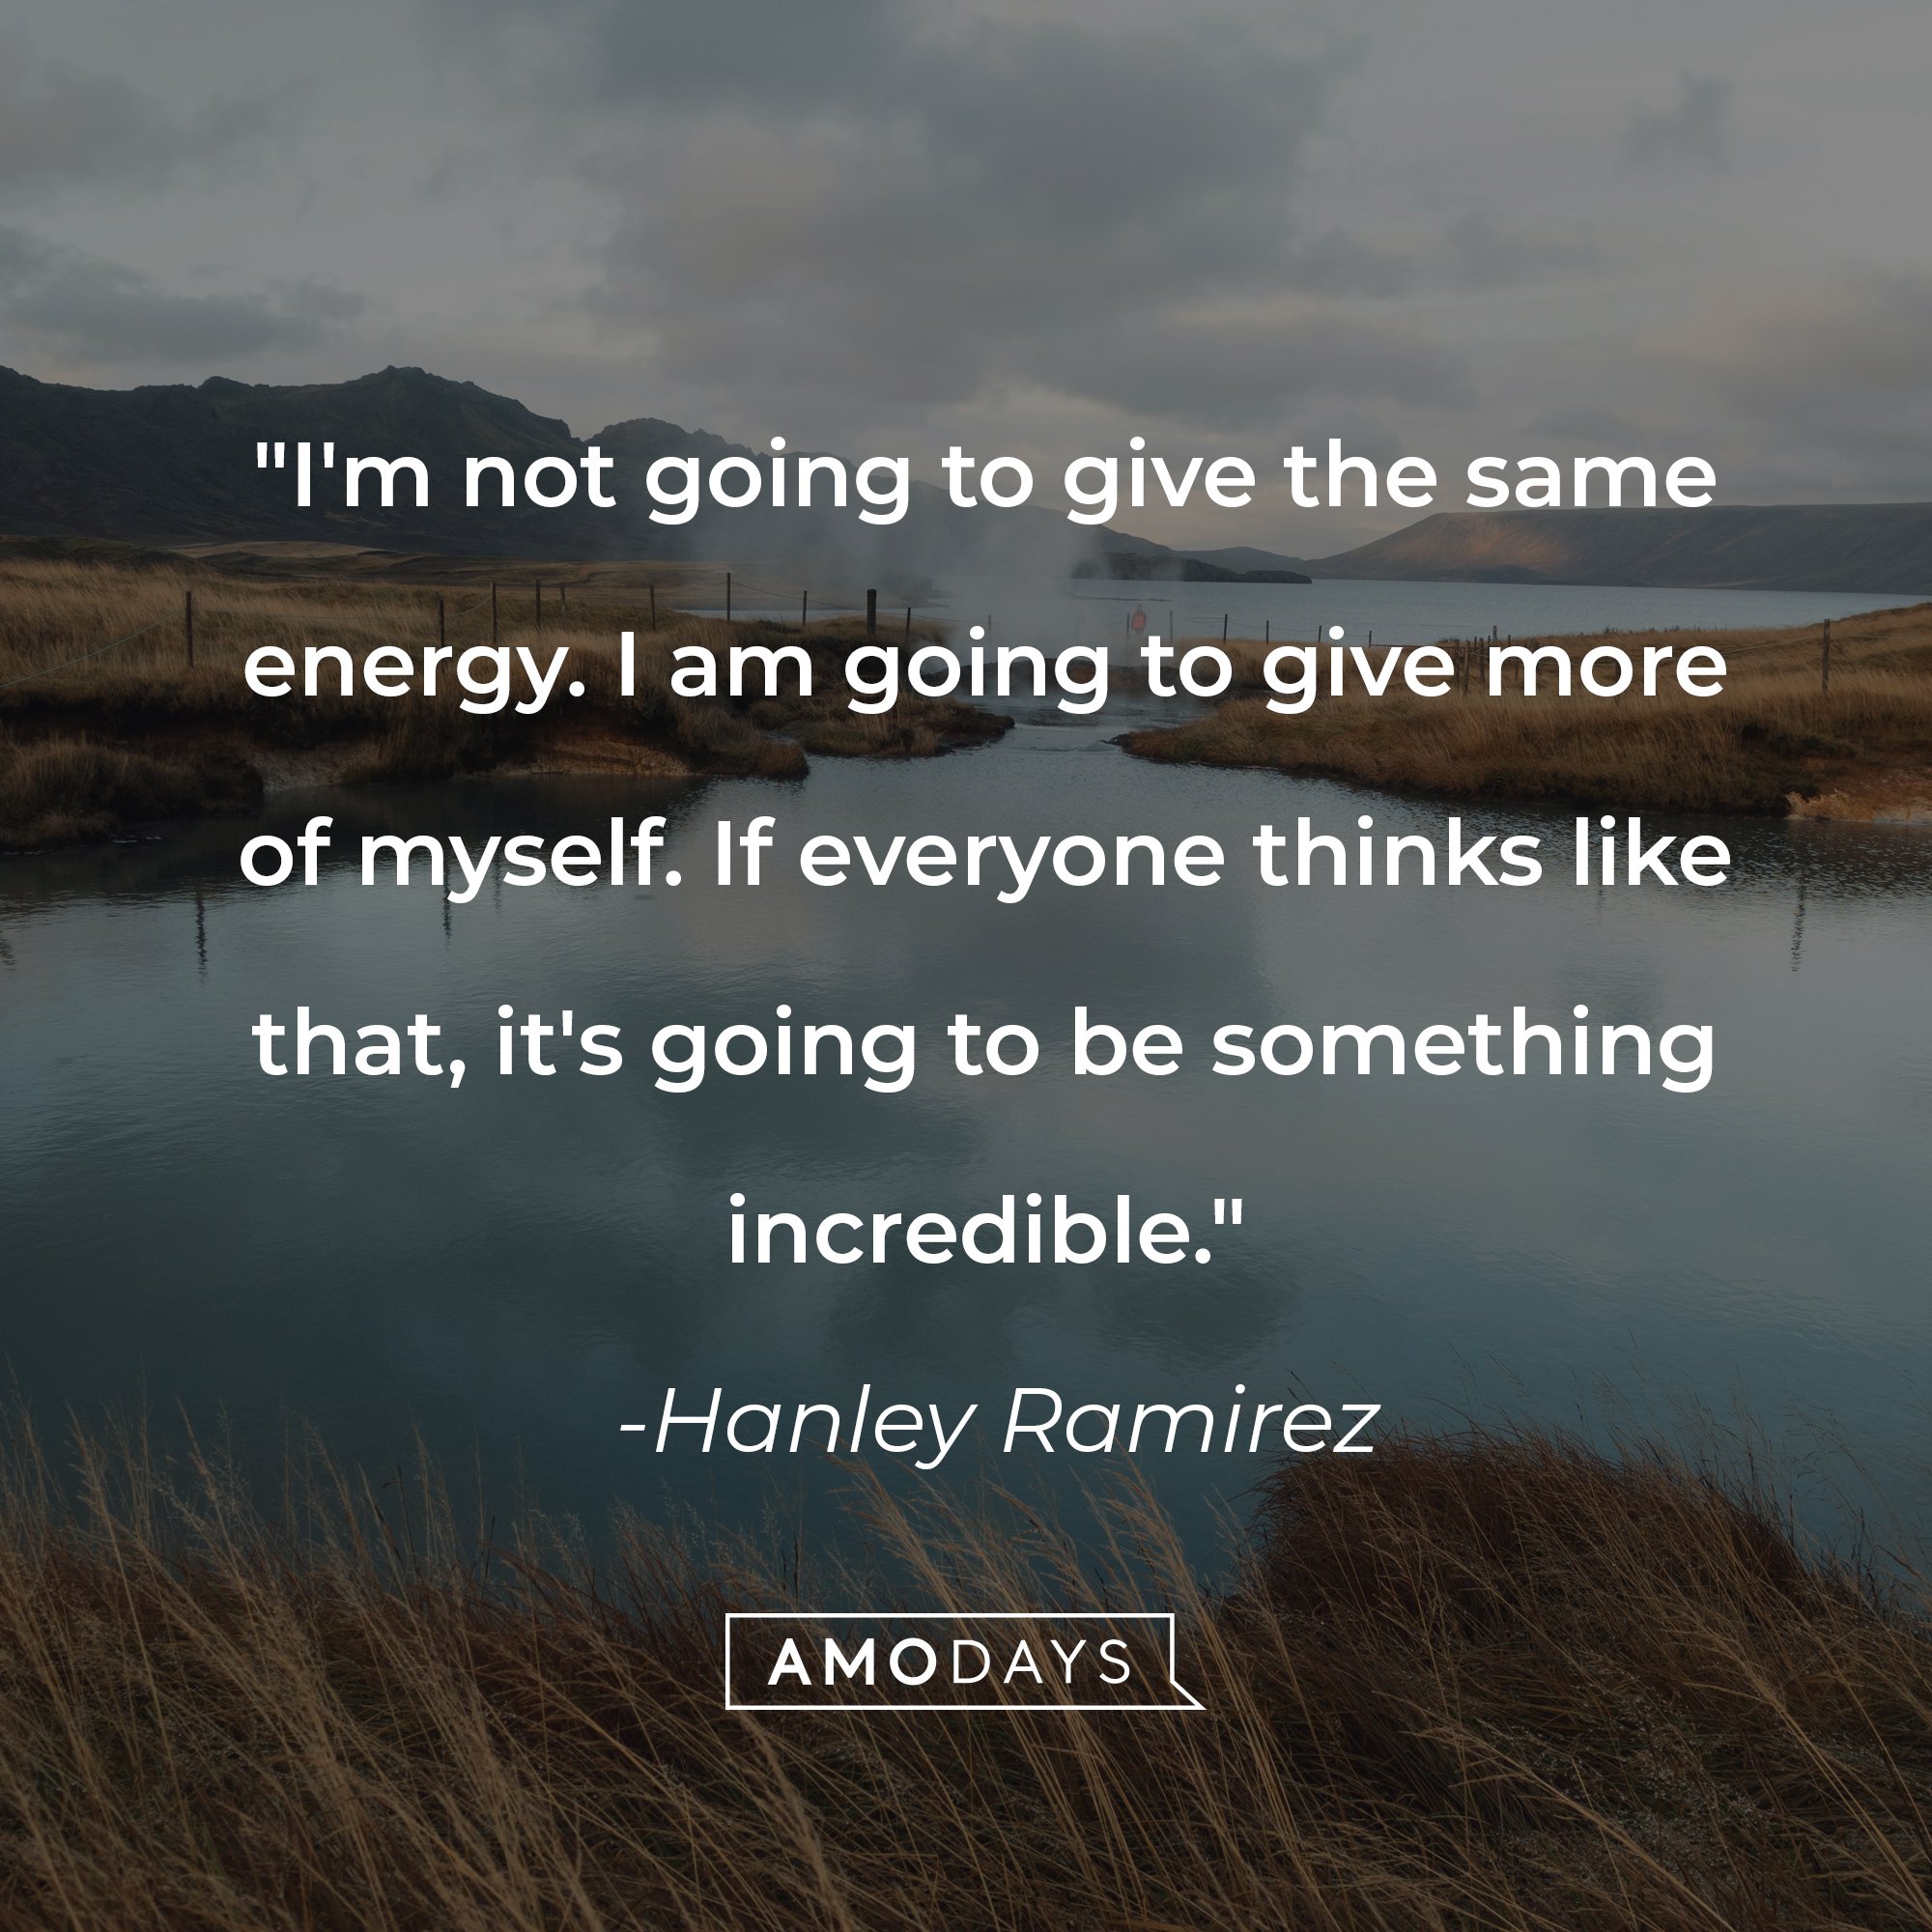 Hanley Ramirez's quote: "I'm not going to give the same energy. I am going to give more of myself. If everyone thinks like that, it's going to be something incredible." | Image: AmoDays